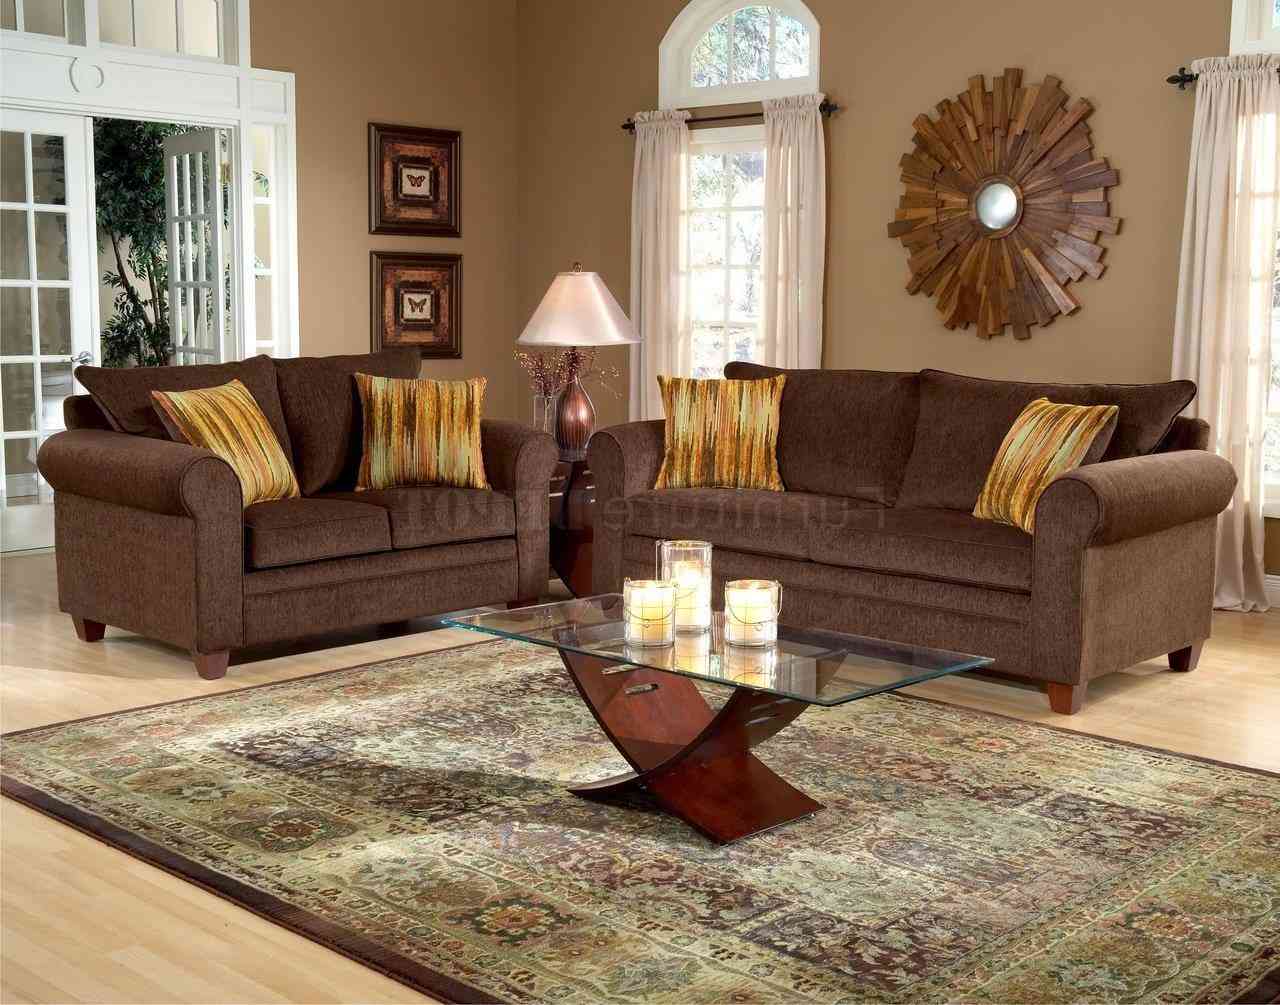 living room color ideas for brown furniture best color to paint a living room with brown sofa ZQSTDRD